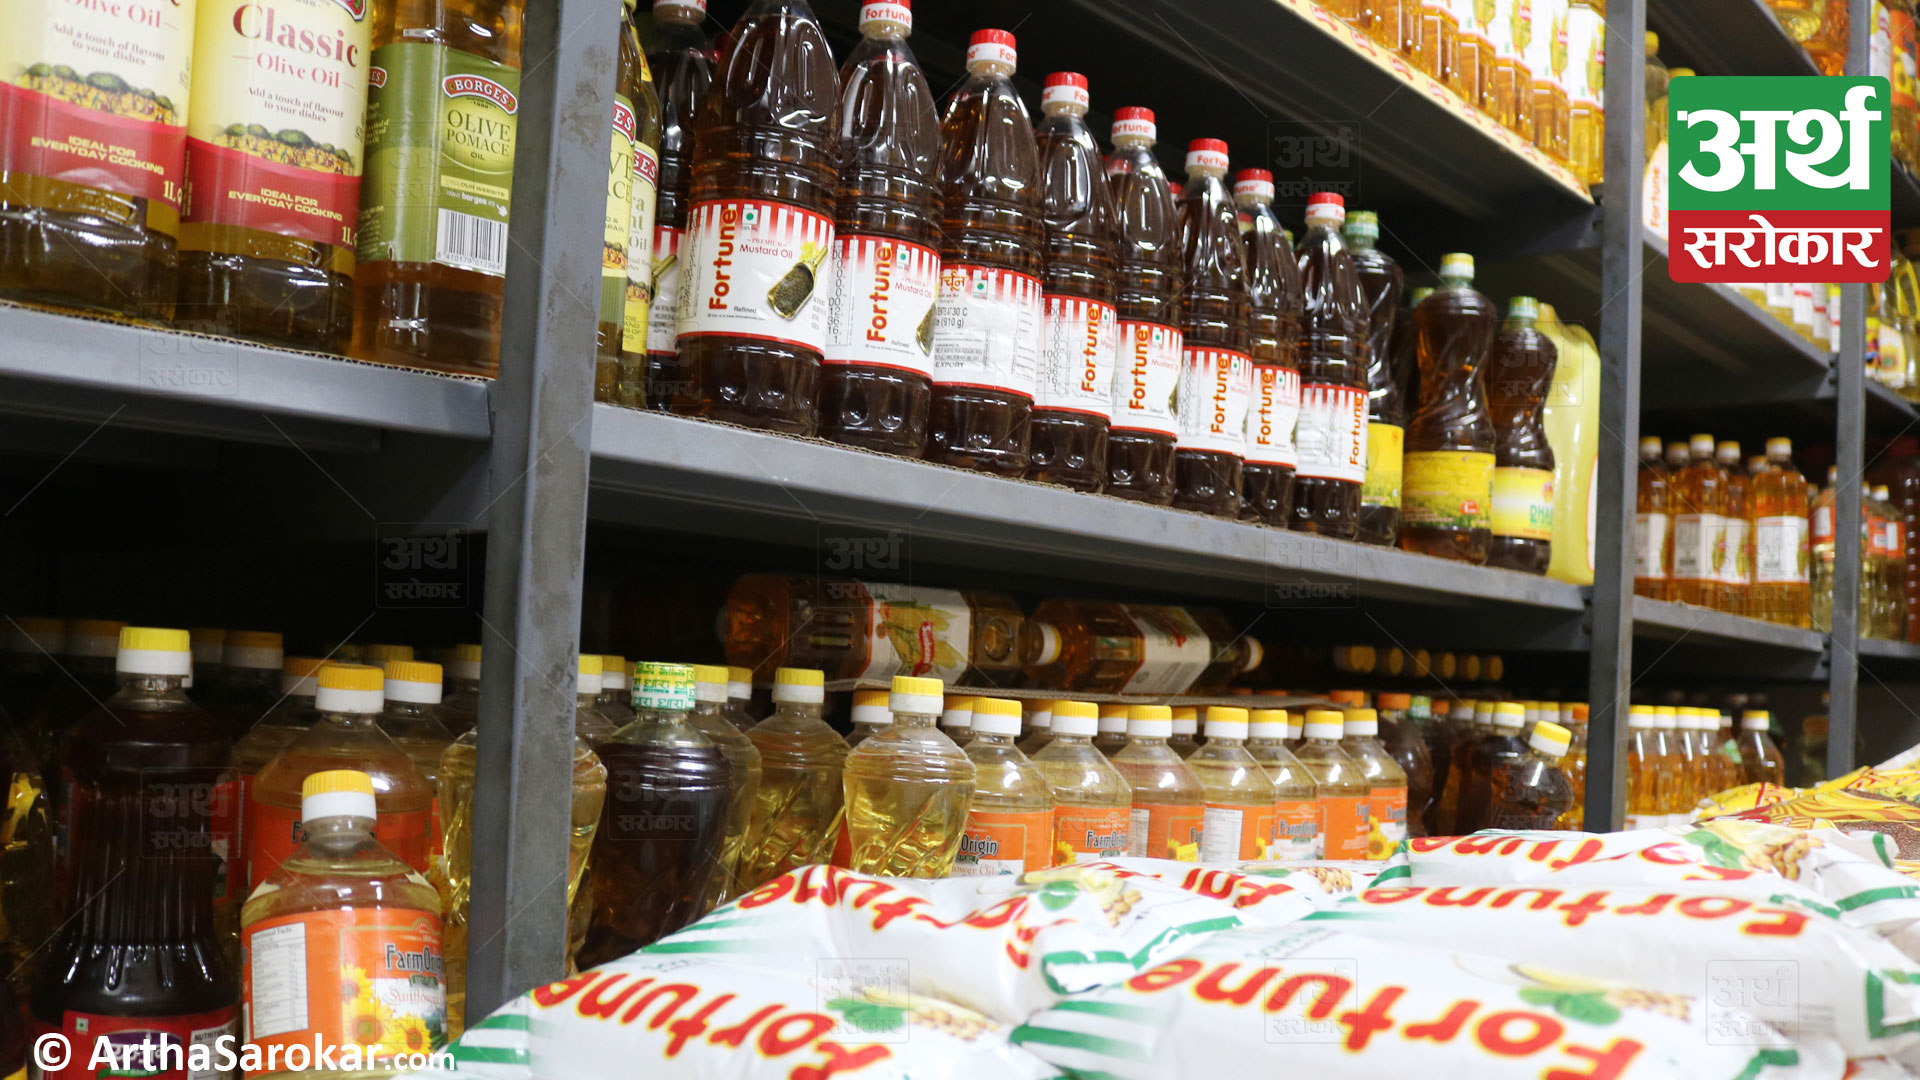 Cooking oil price hike attributed to international causes